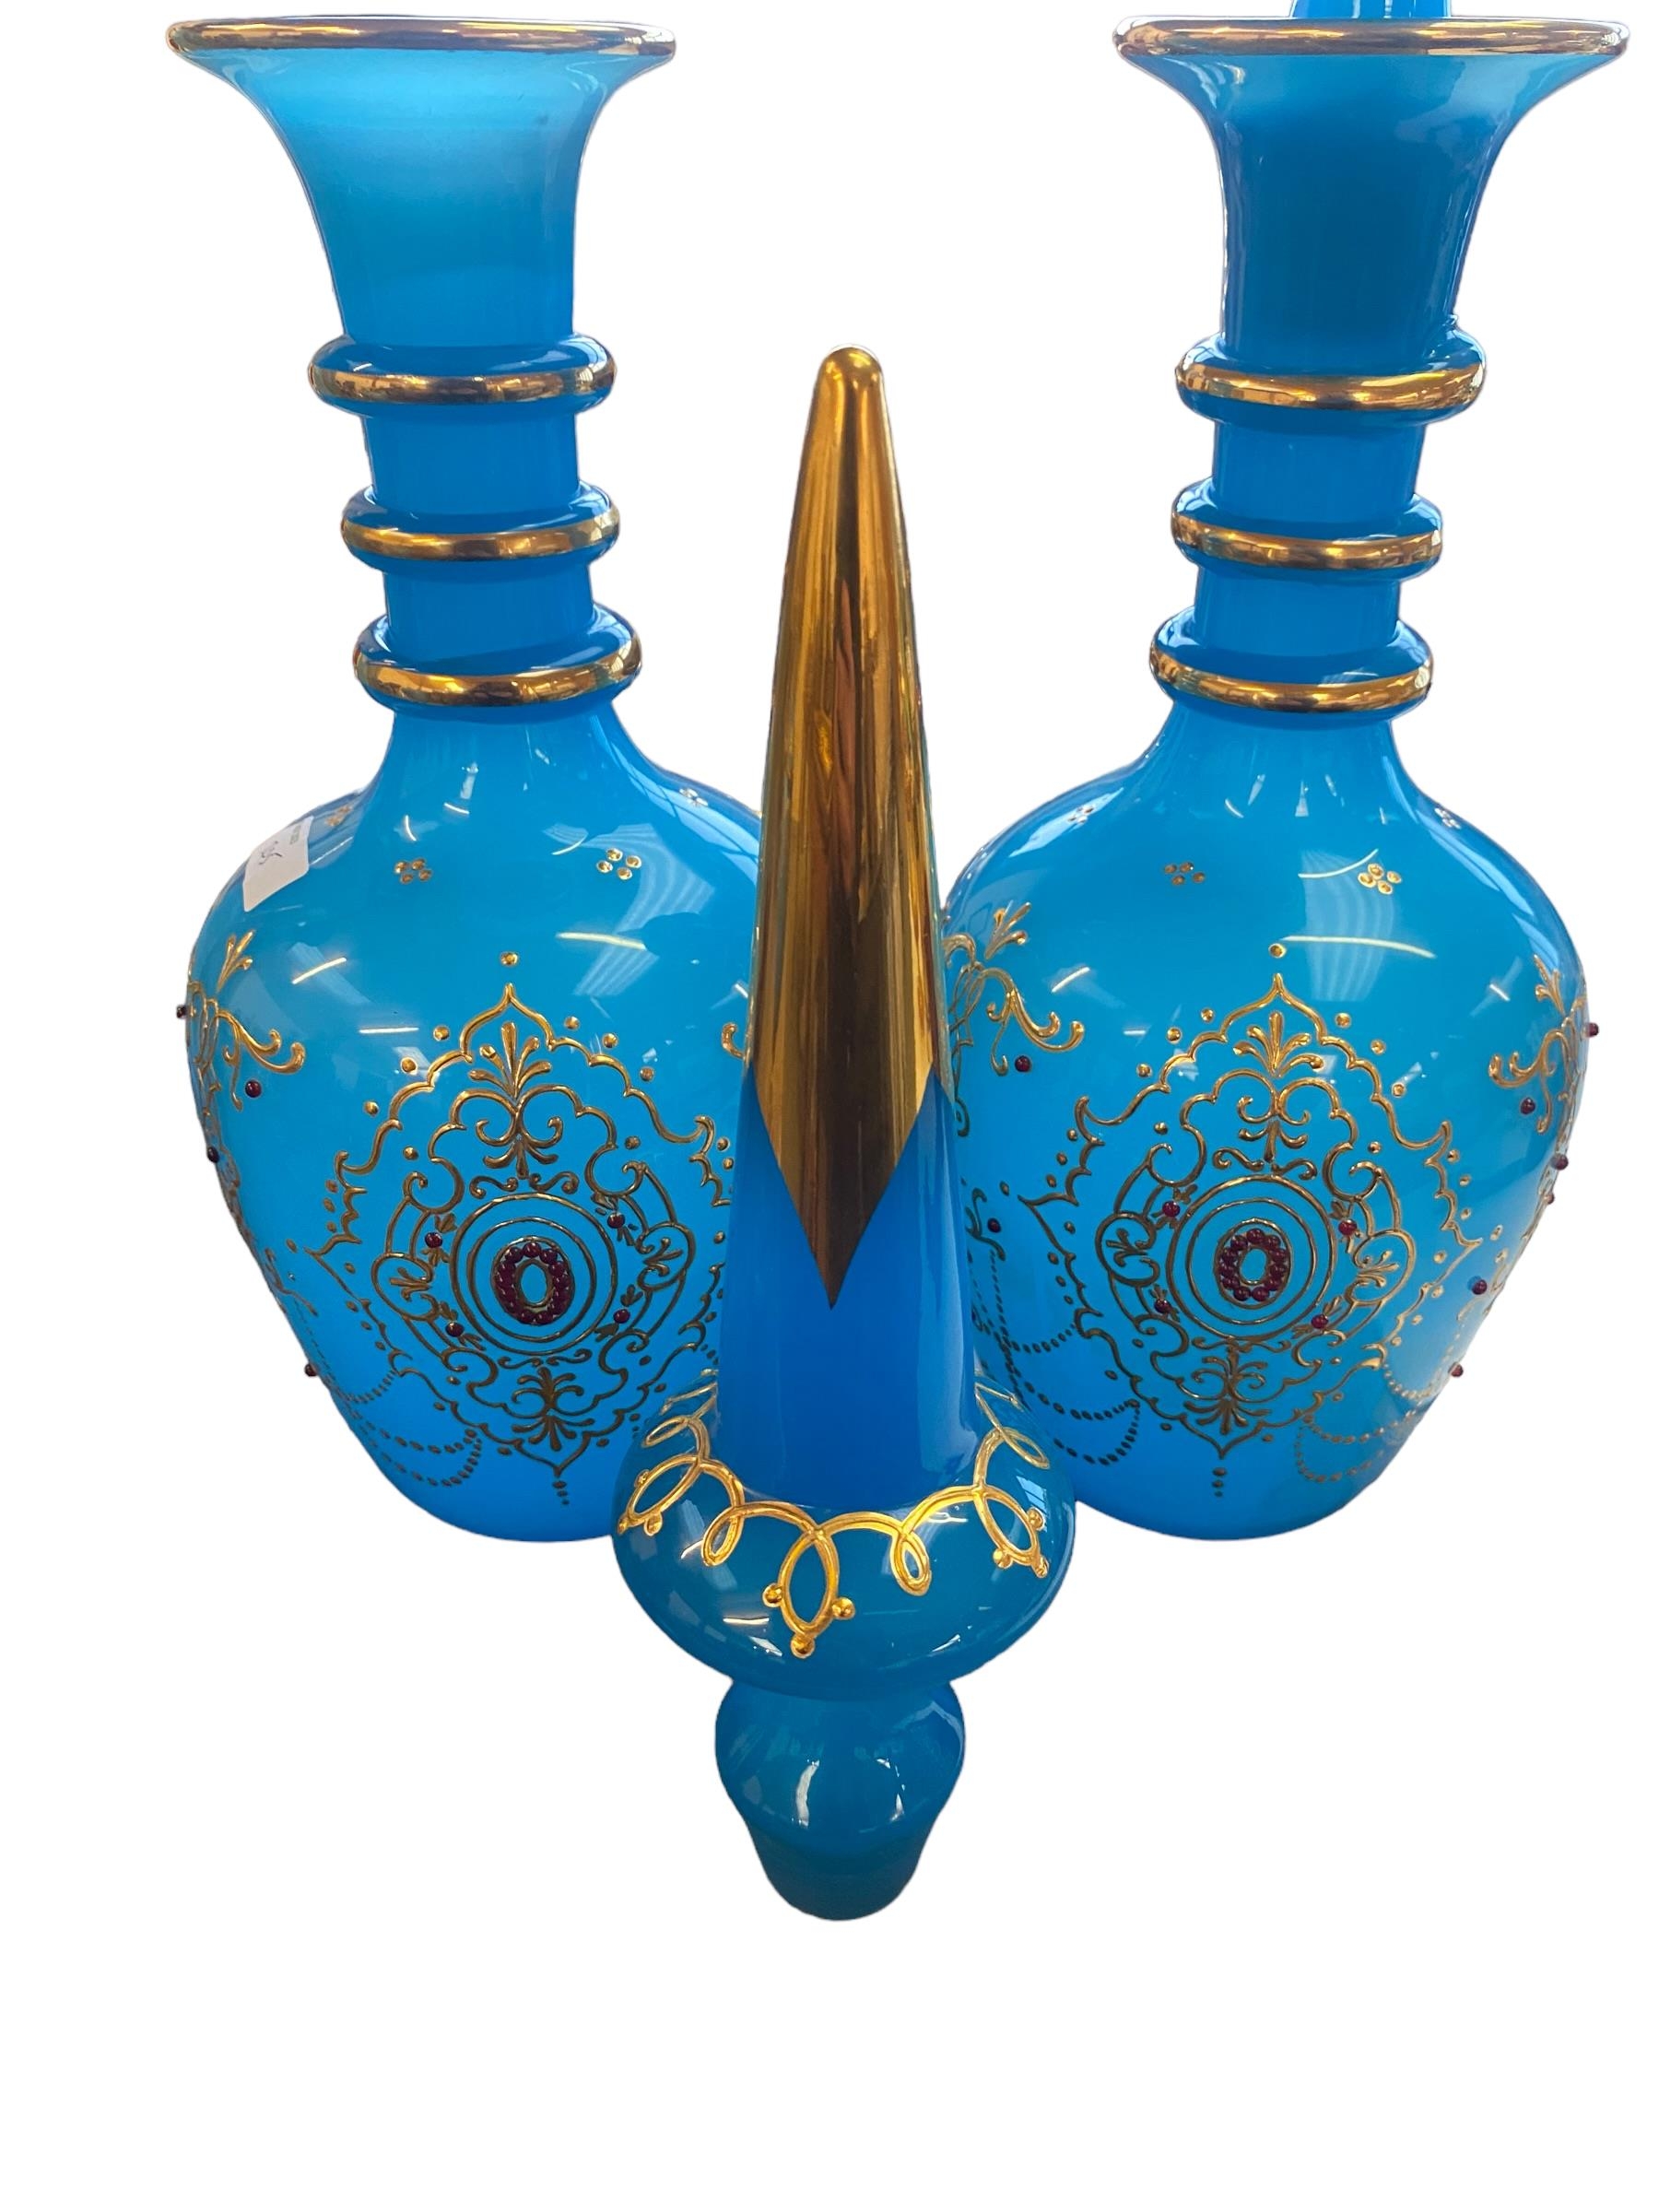 Pair of bohemian opague blue and gilt lidded vases with red jewelled enamel decoration 59 cm H - Image 3 of 3